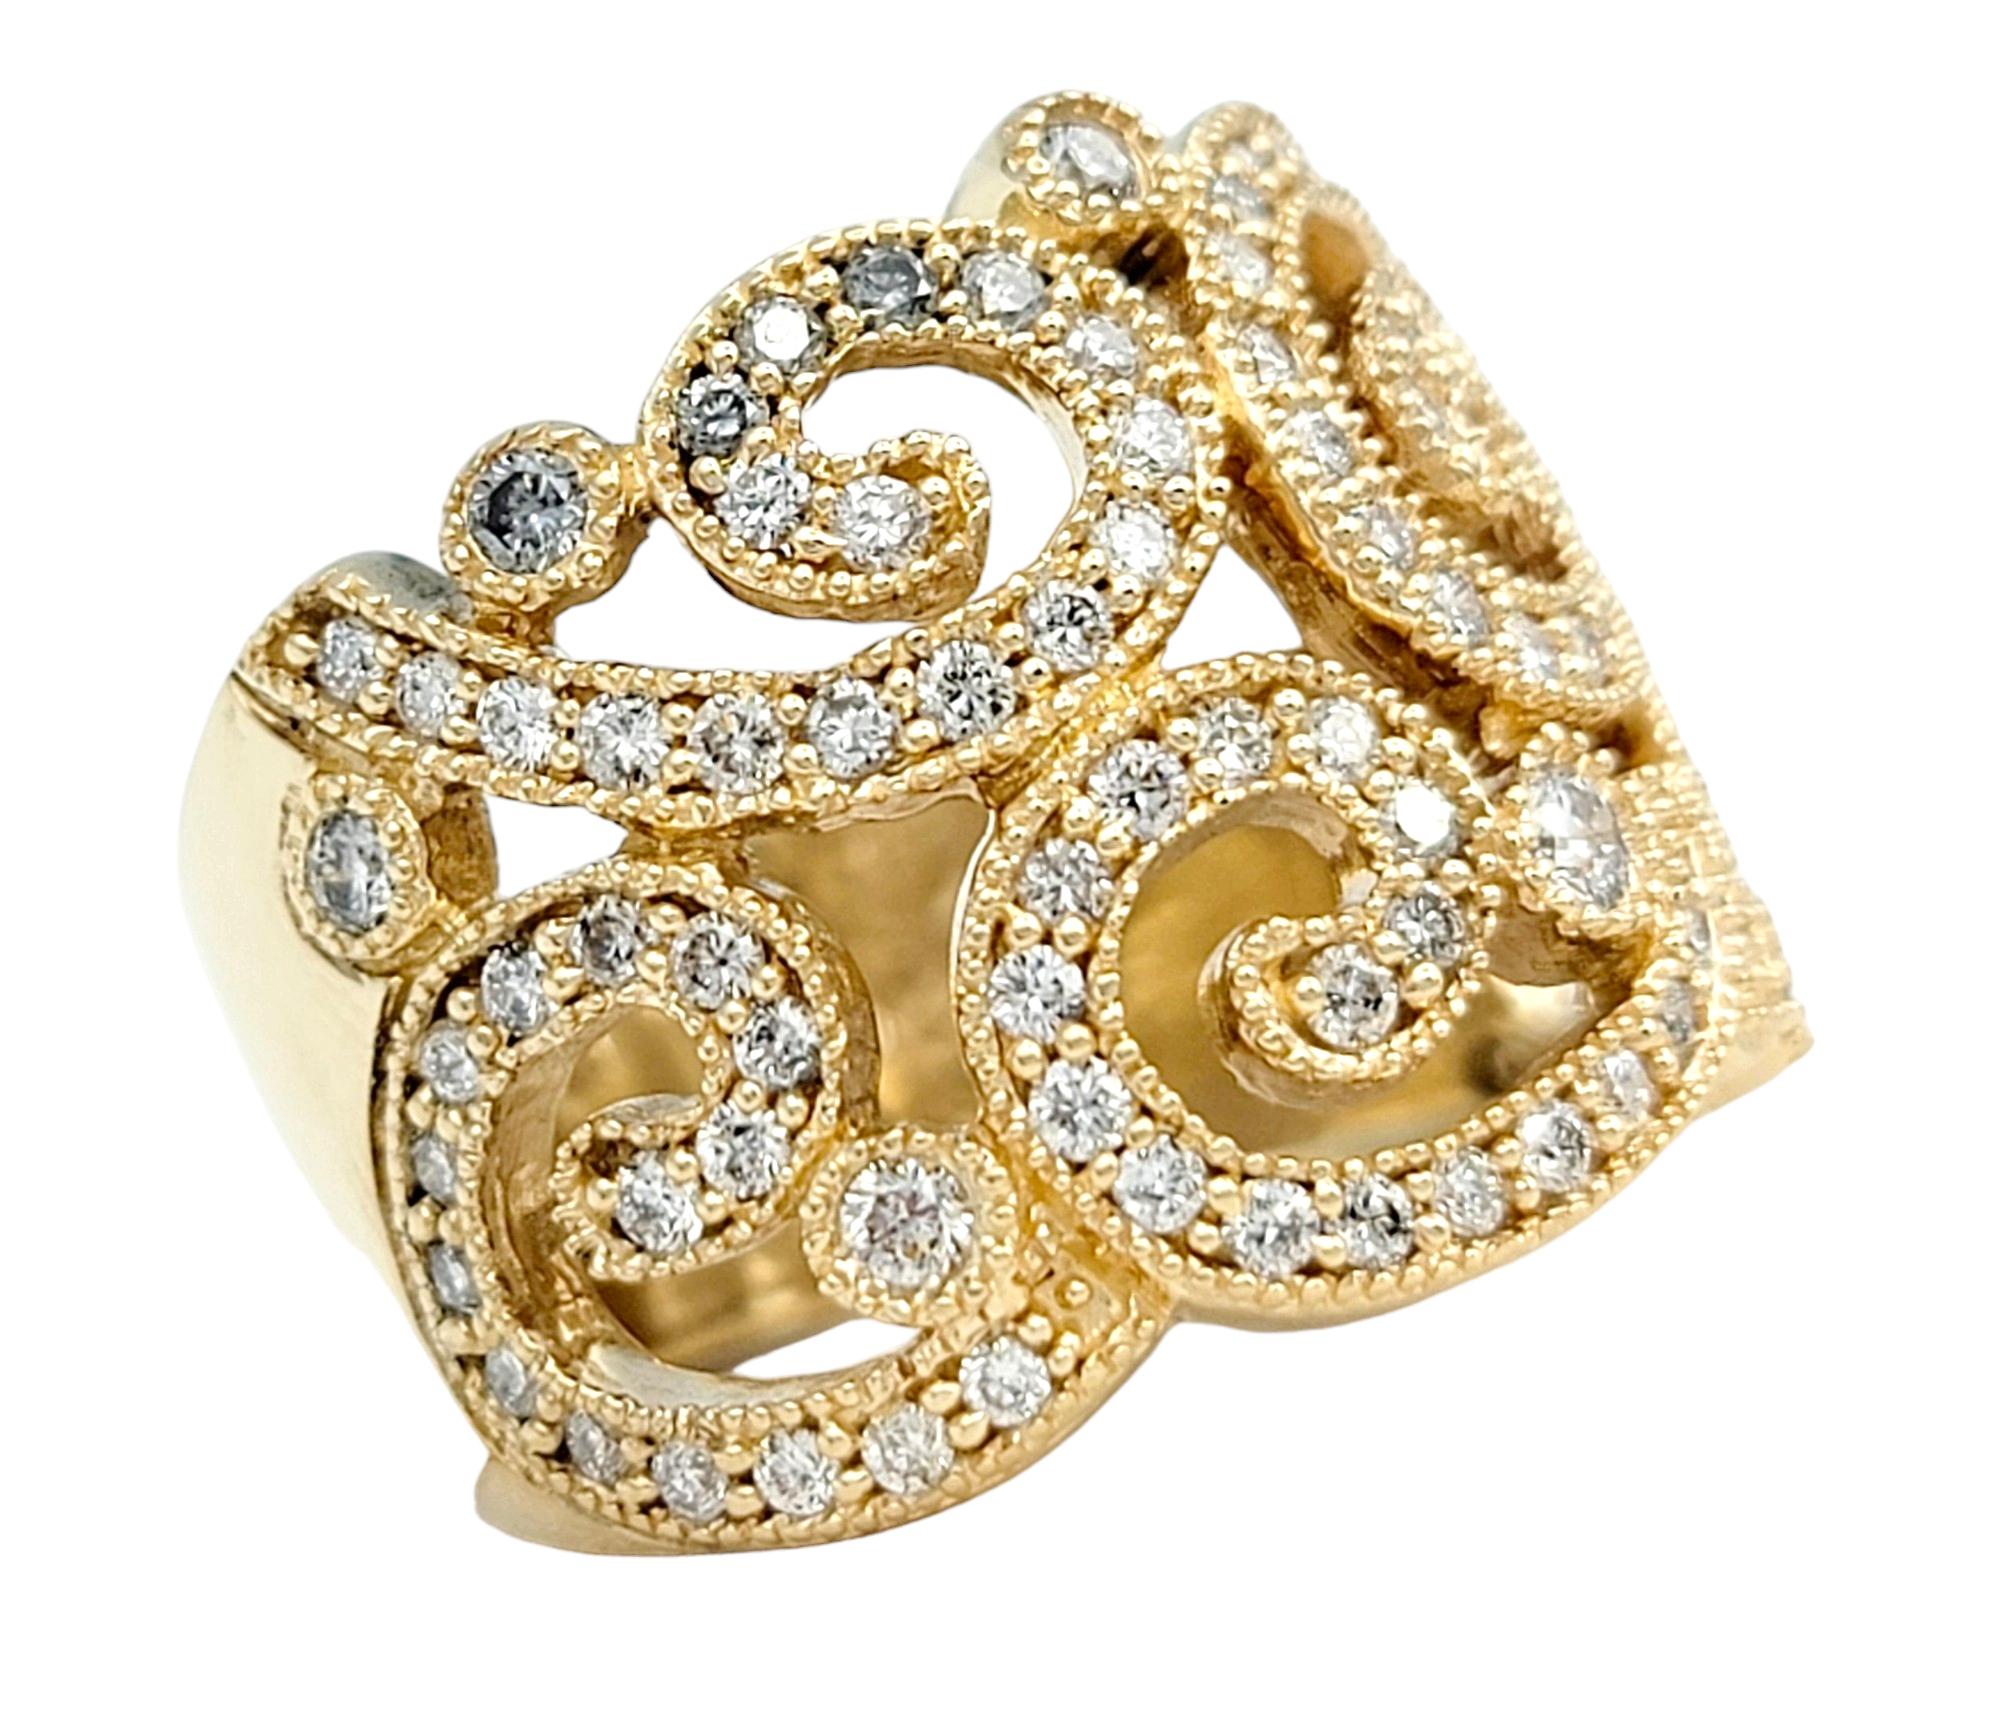 Ring Size: 6.5

This elegant Effy band ring, set in luxurious 14 karat yellow gold, is a stunning piece that seamlessly blends artistry and sophistication. The ring features a scroll-like cutout design adorned with diamonds, creating a captivating